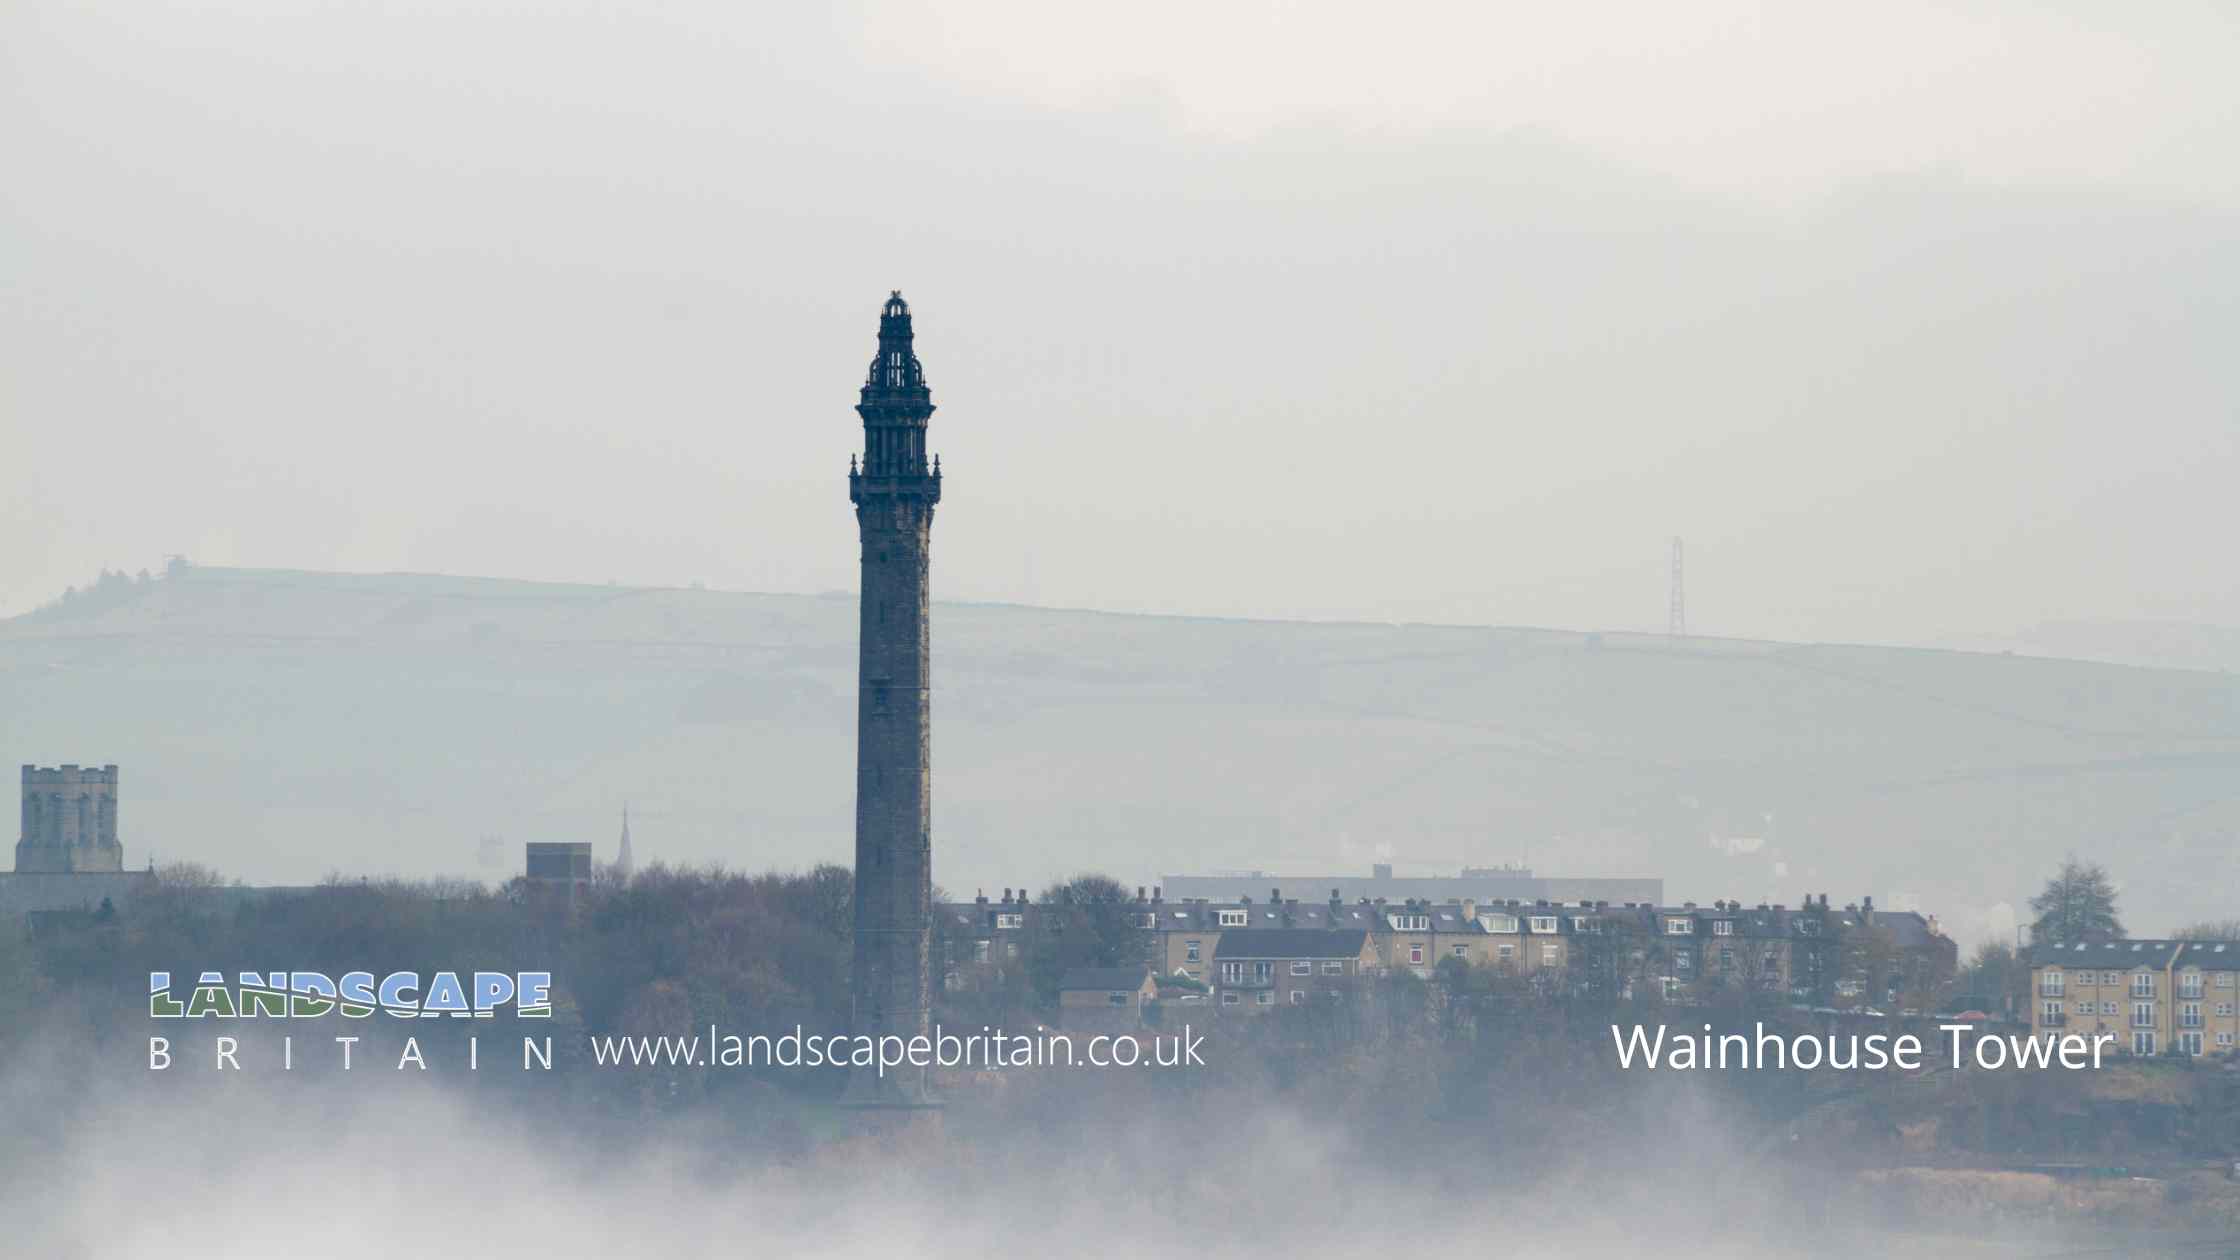 Historic Monuments in West Yorkshire